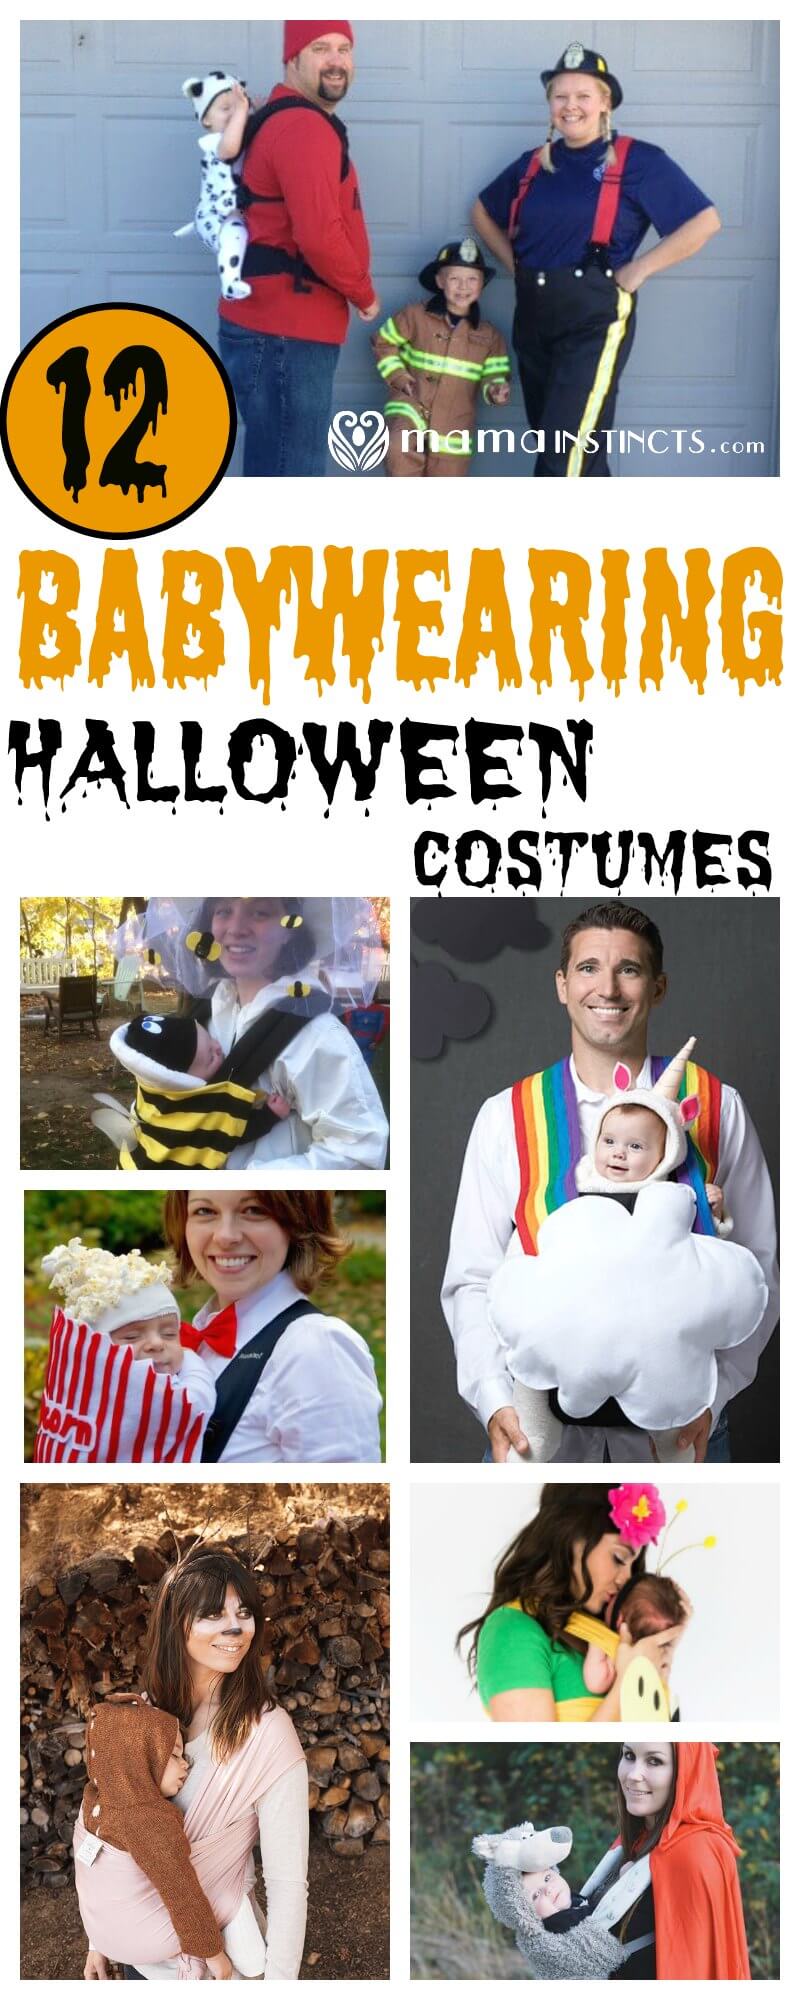 Are you a babywearing this Halloween? Then check out these awesome Halloween babywearing costumes that you can easily make at home.